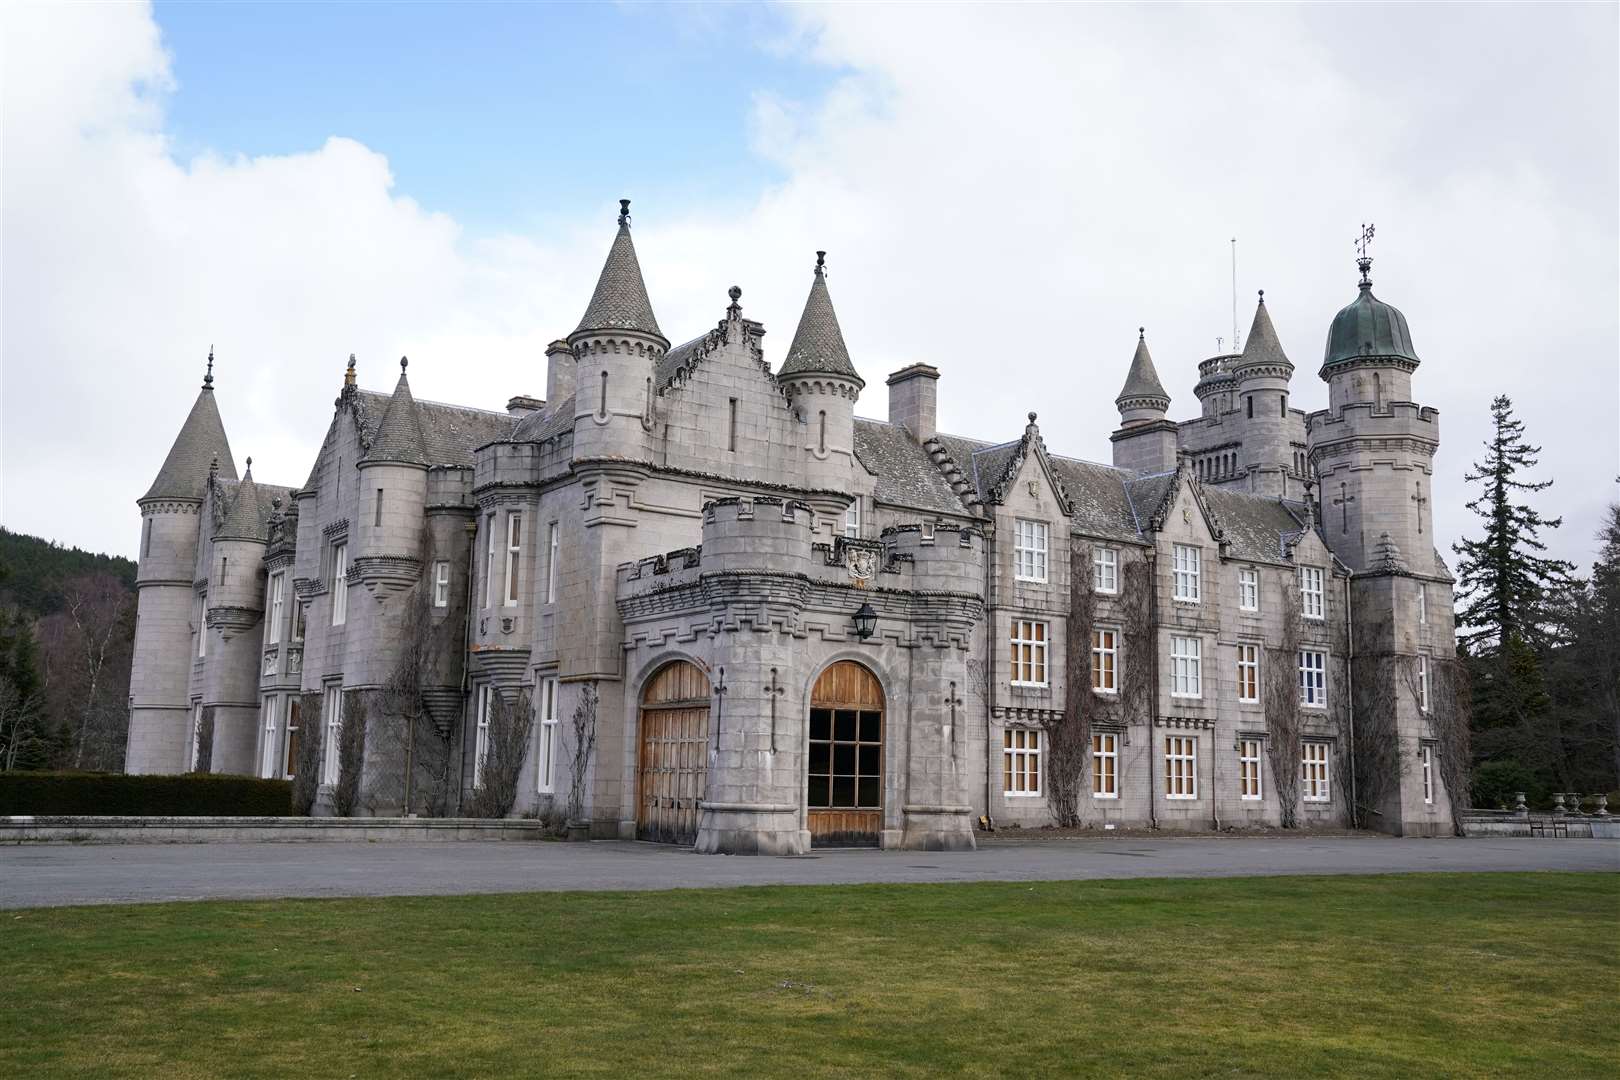 The Queen will hold audiences with Boris Johnson and the new prime minister at Balmoral Castle (Andrew Milligan/PA)